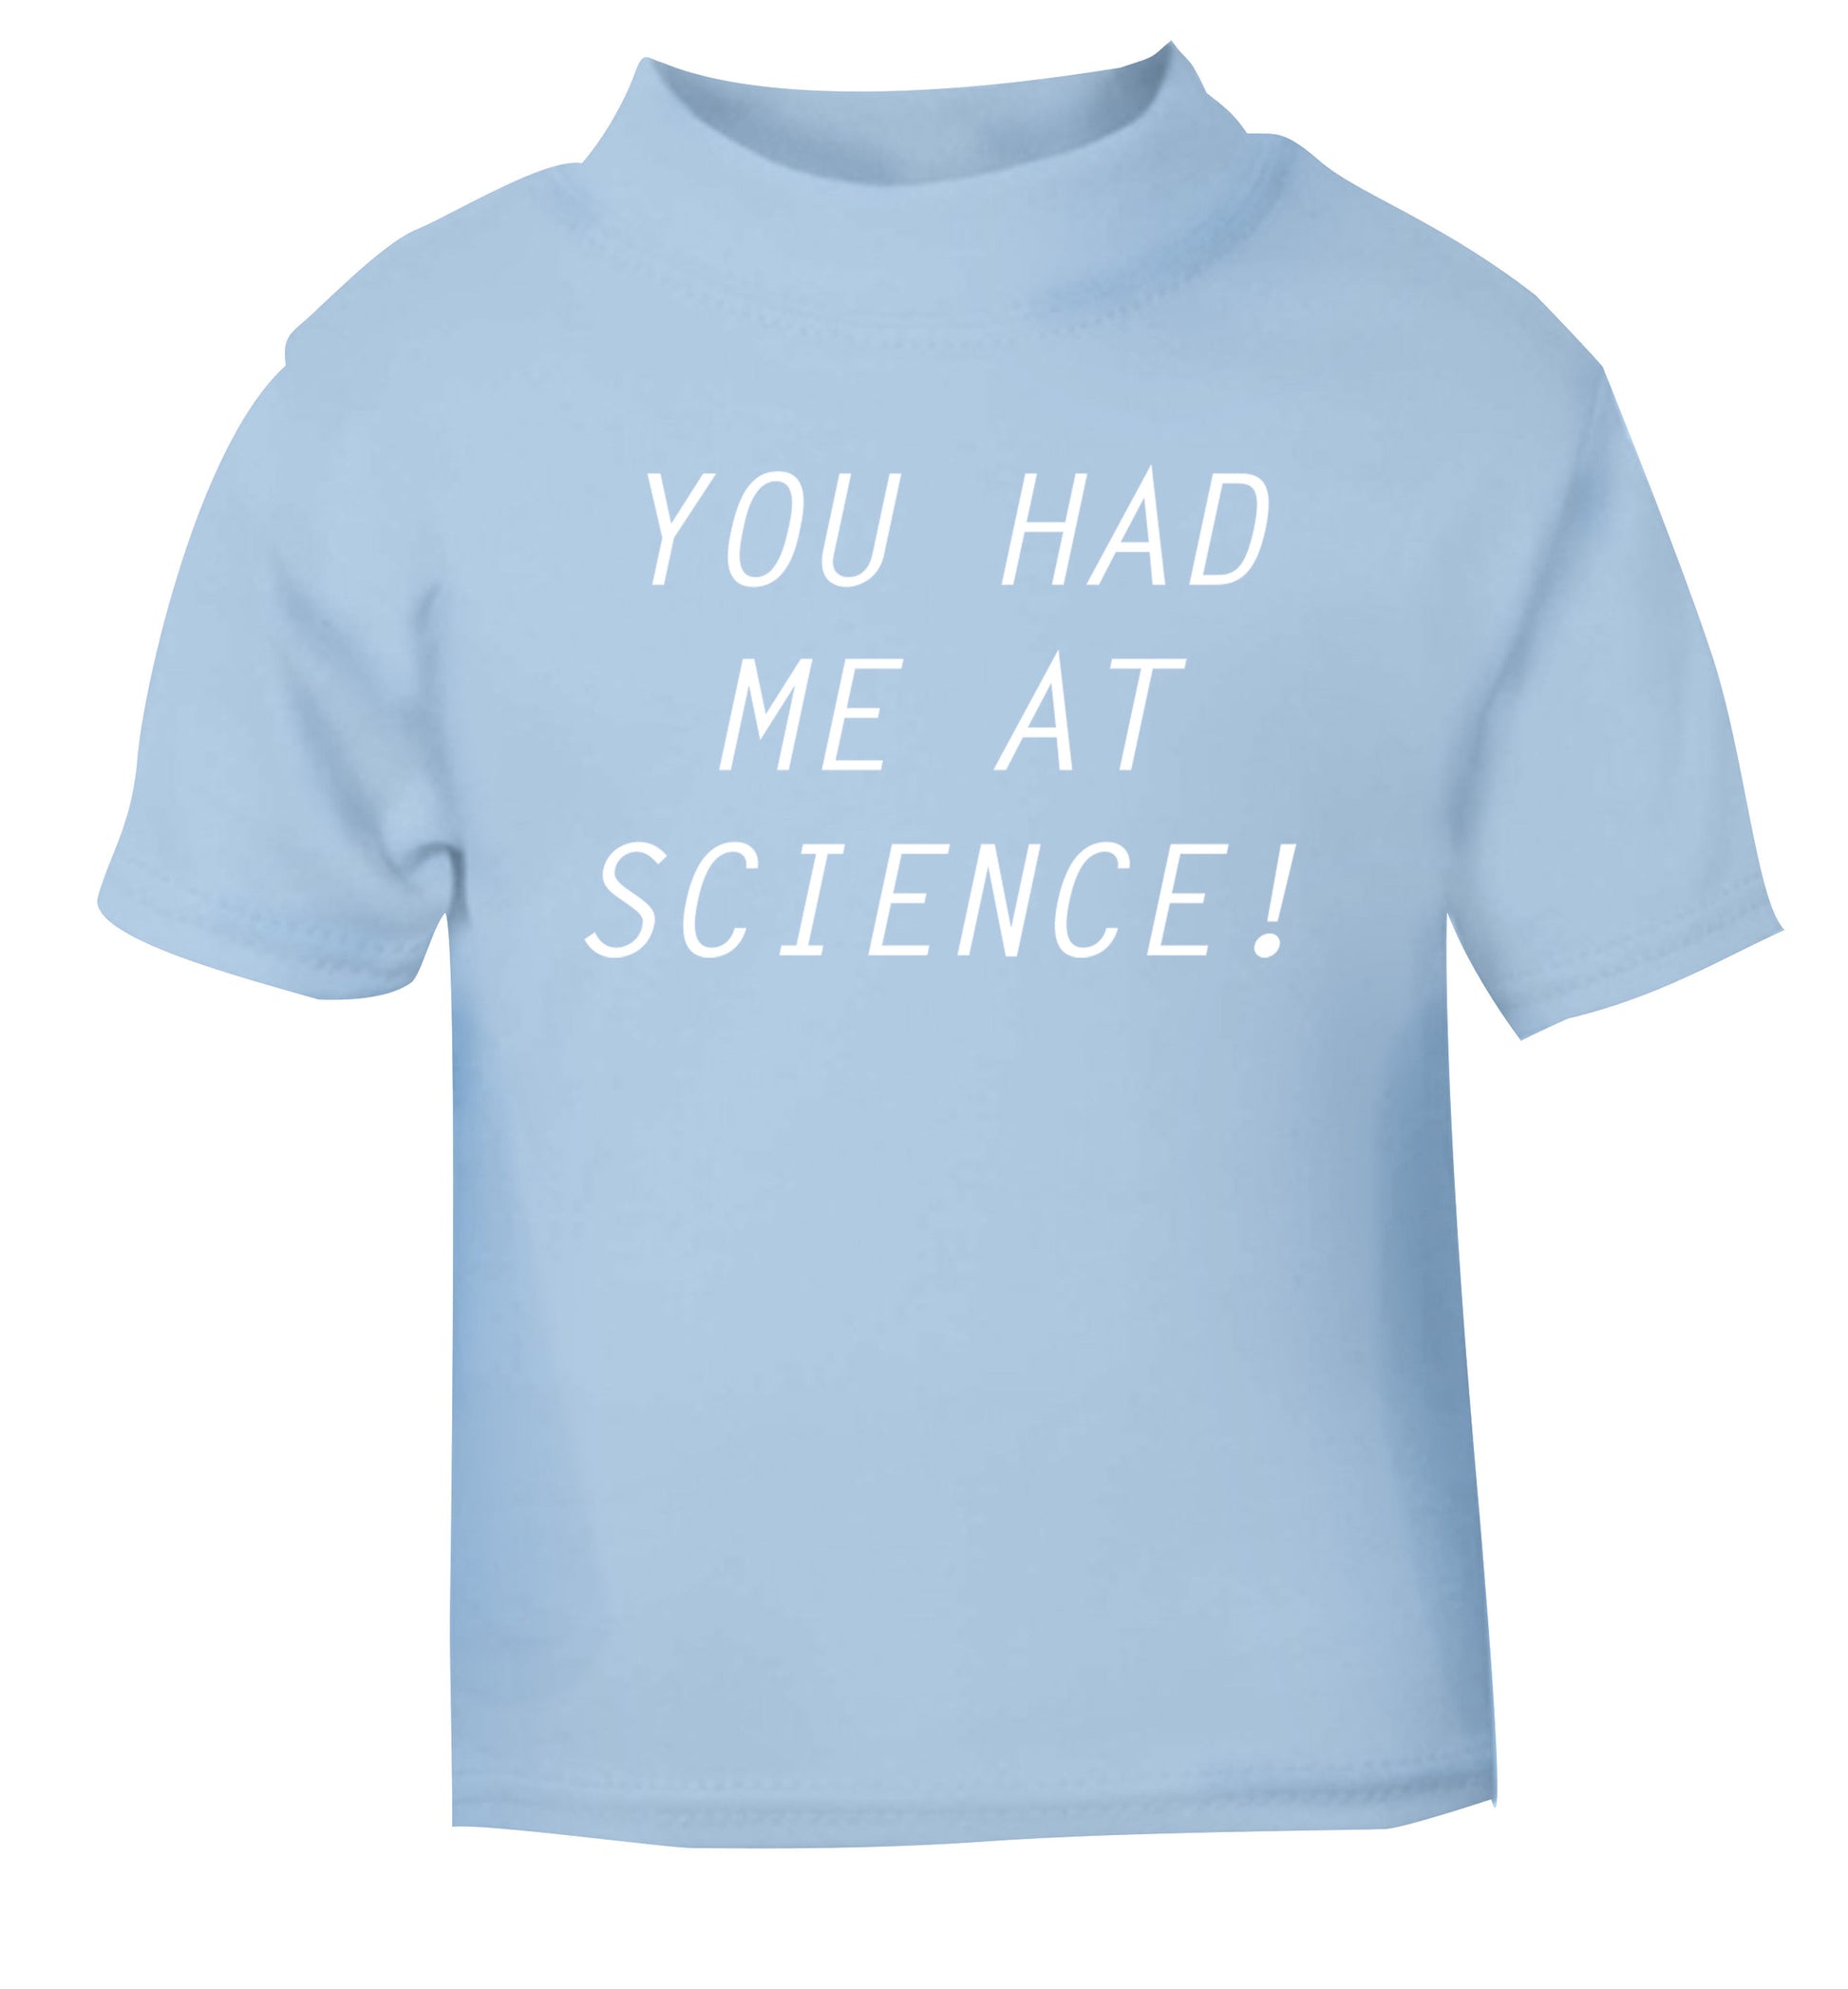 You had me at science light blue Baby Toddler Tshirt 2 Years